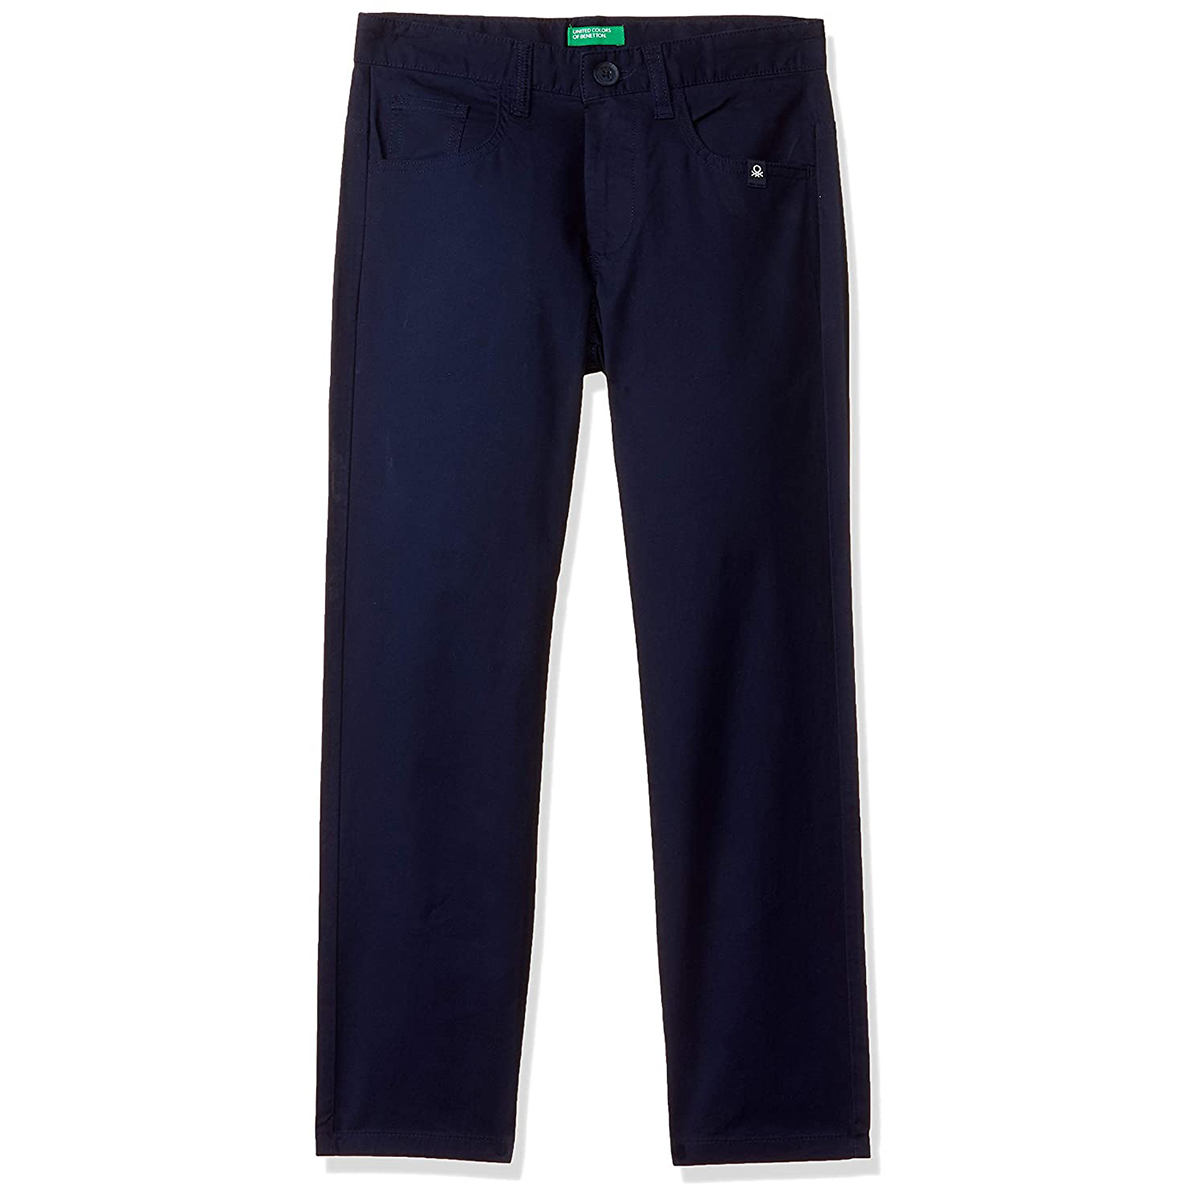 United Colors of Benetton Boy's Slim Fit Casual Pants- Navy Blue